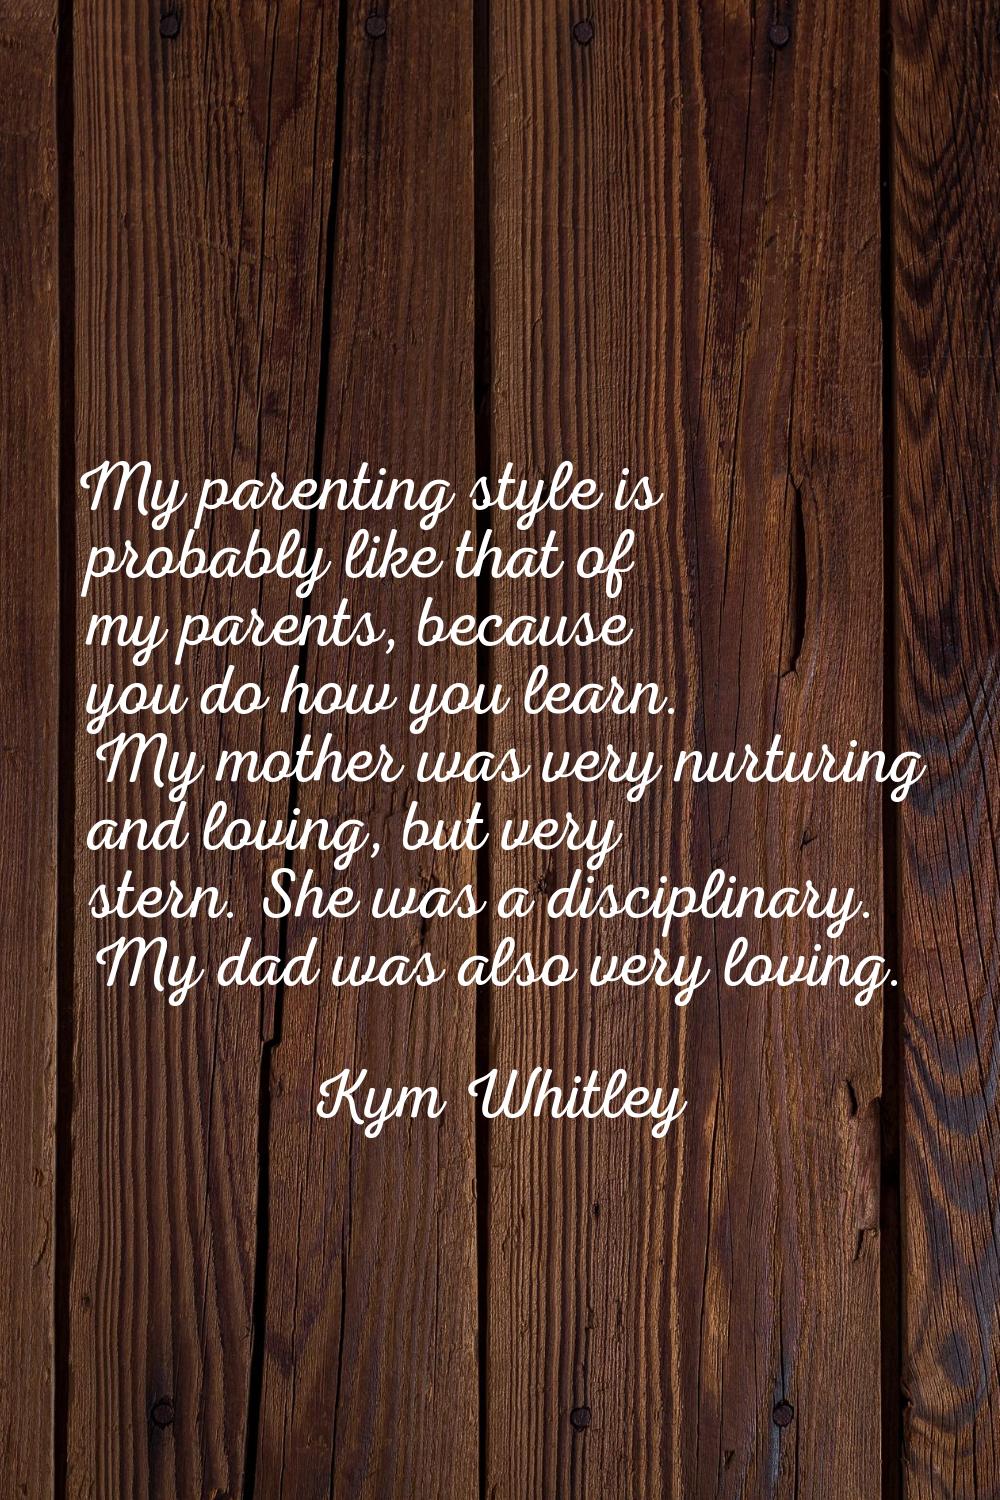 My parenting style is probably like that of my parents, because you do how you learn. My mother was